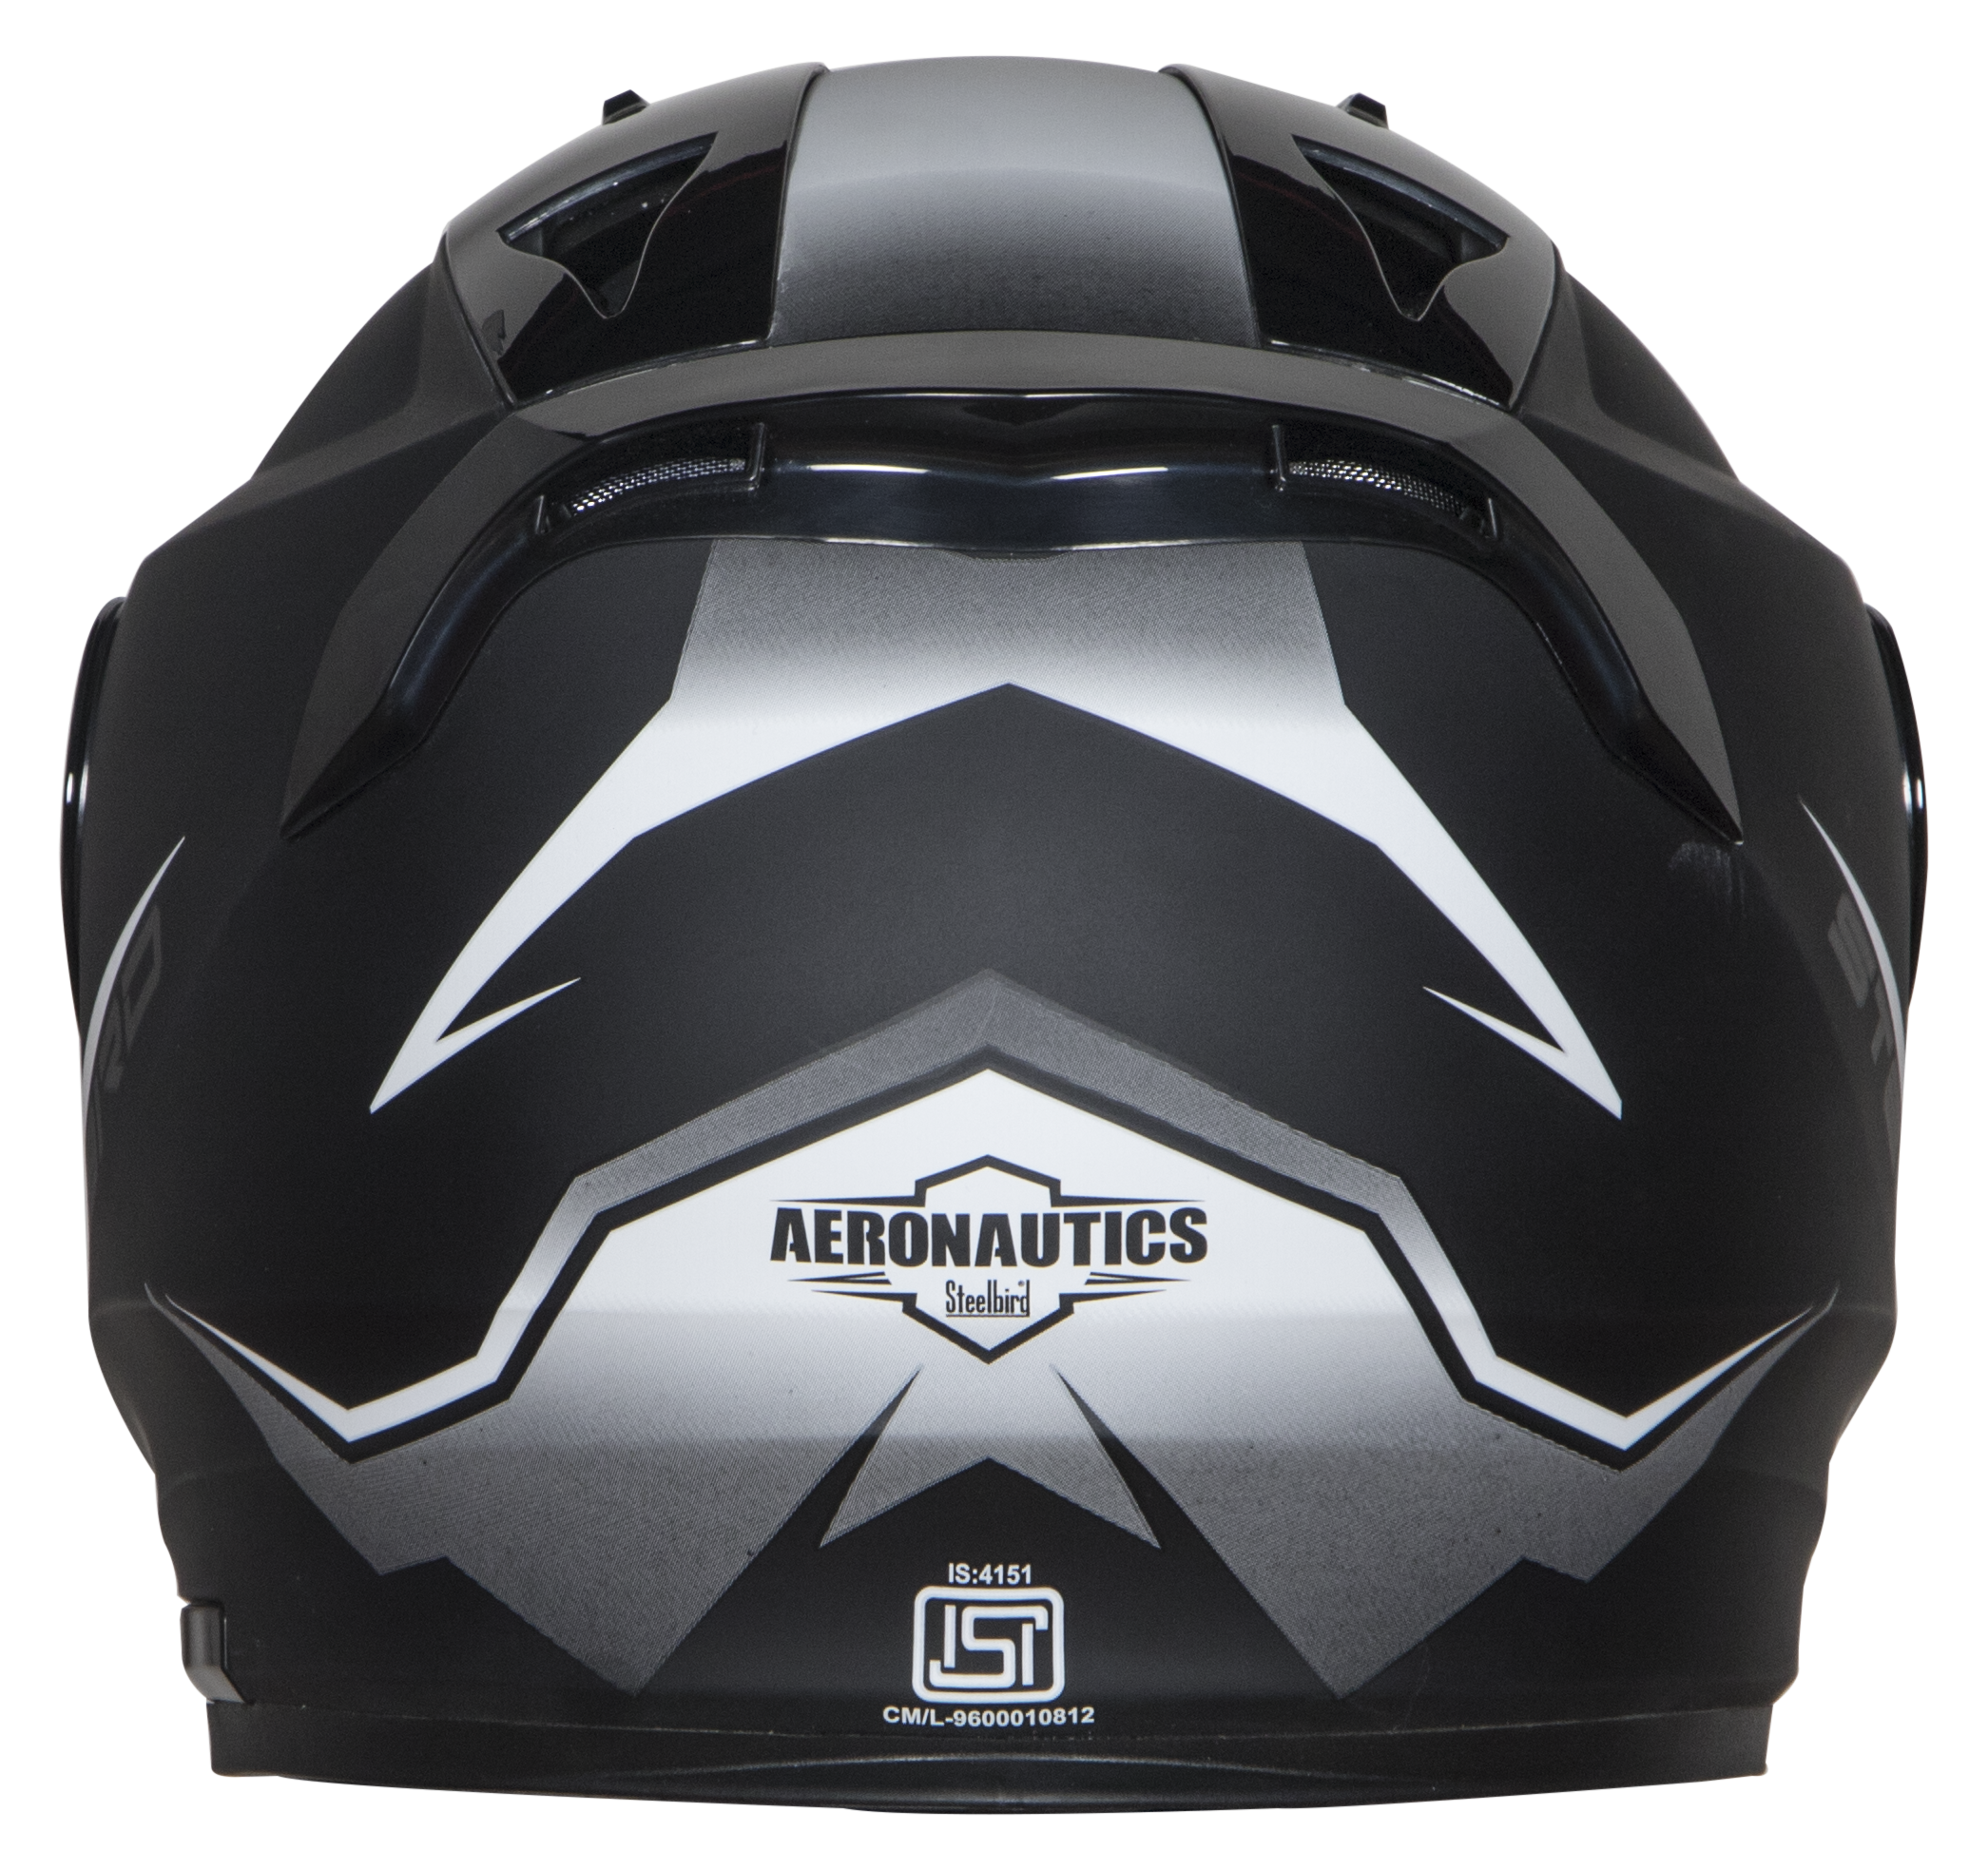 SA-1 WHIF Mat Black With White (Fitted With Clear Visor Extra Chrome Rainbow Visor Free)